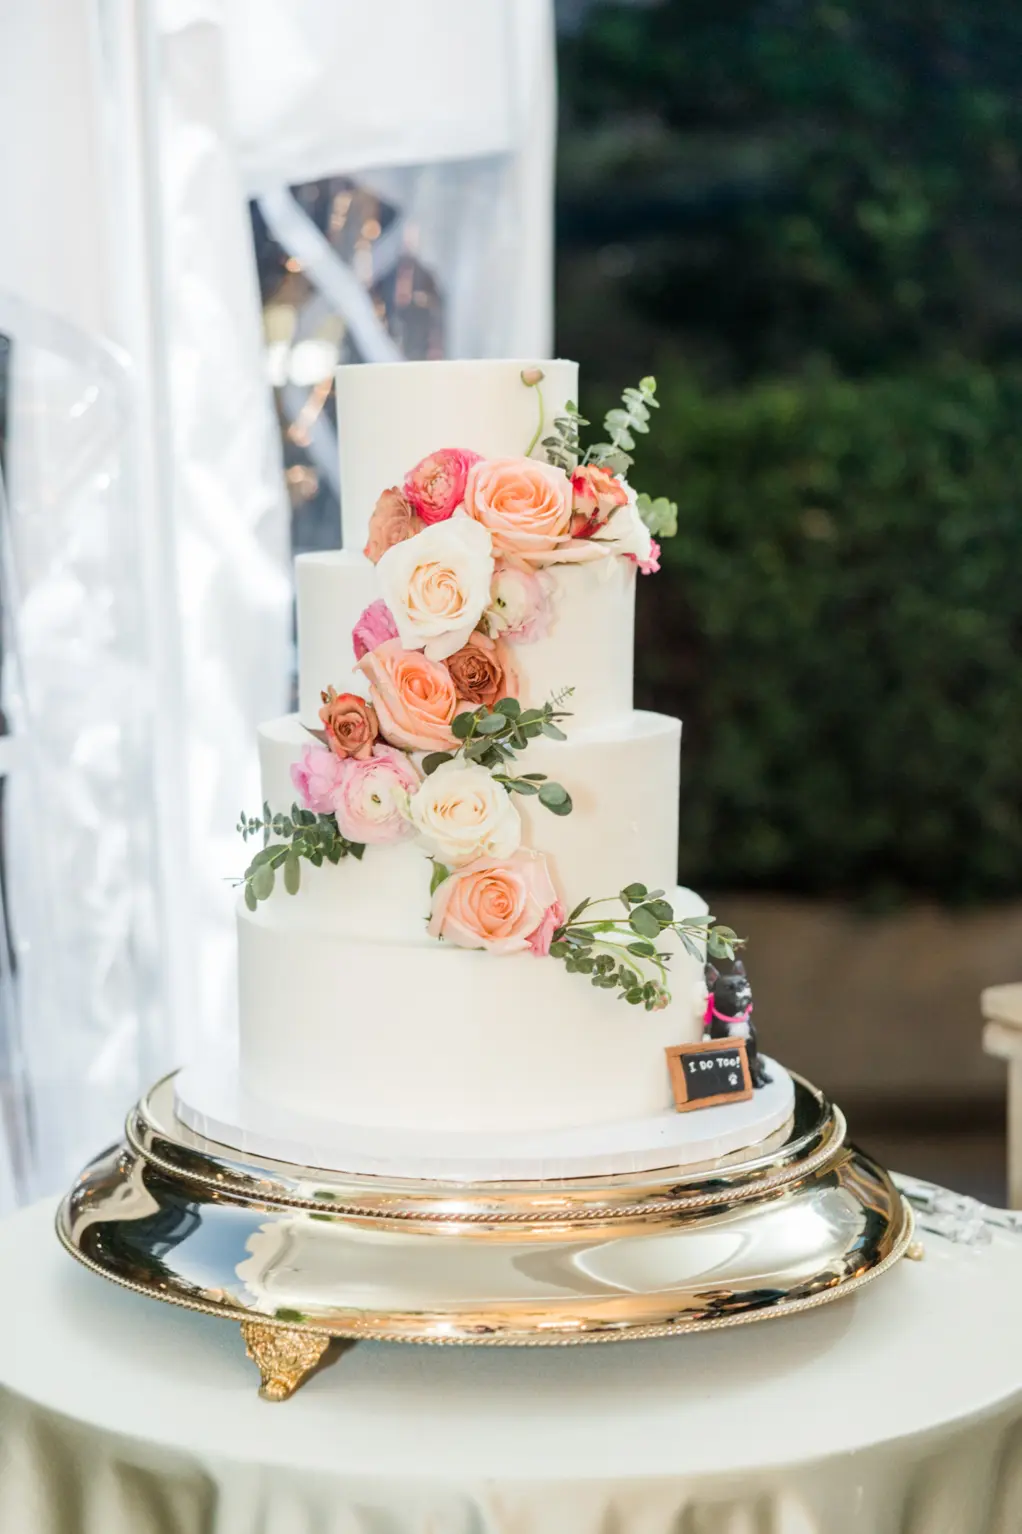 Round White Four-Tiered Wedding Cake with Pink and Orange Rose Flower Accents Ideas